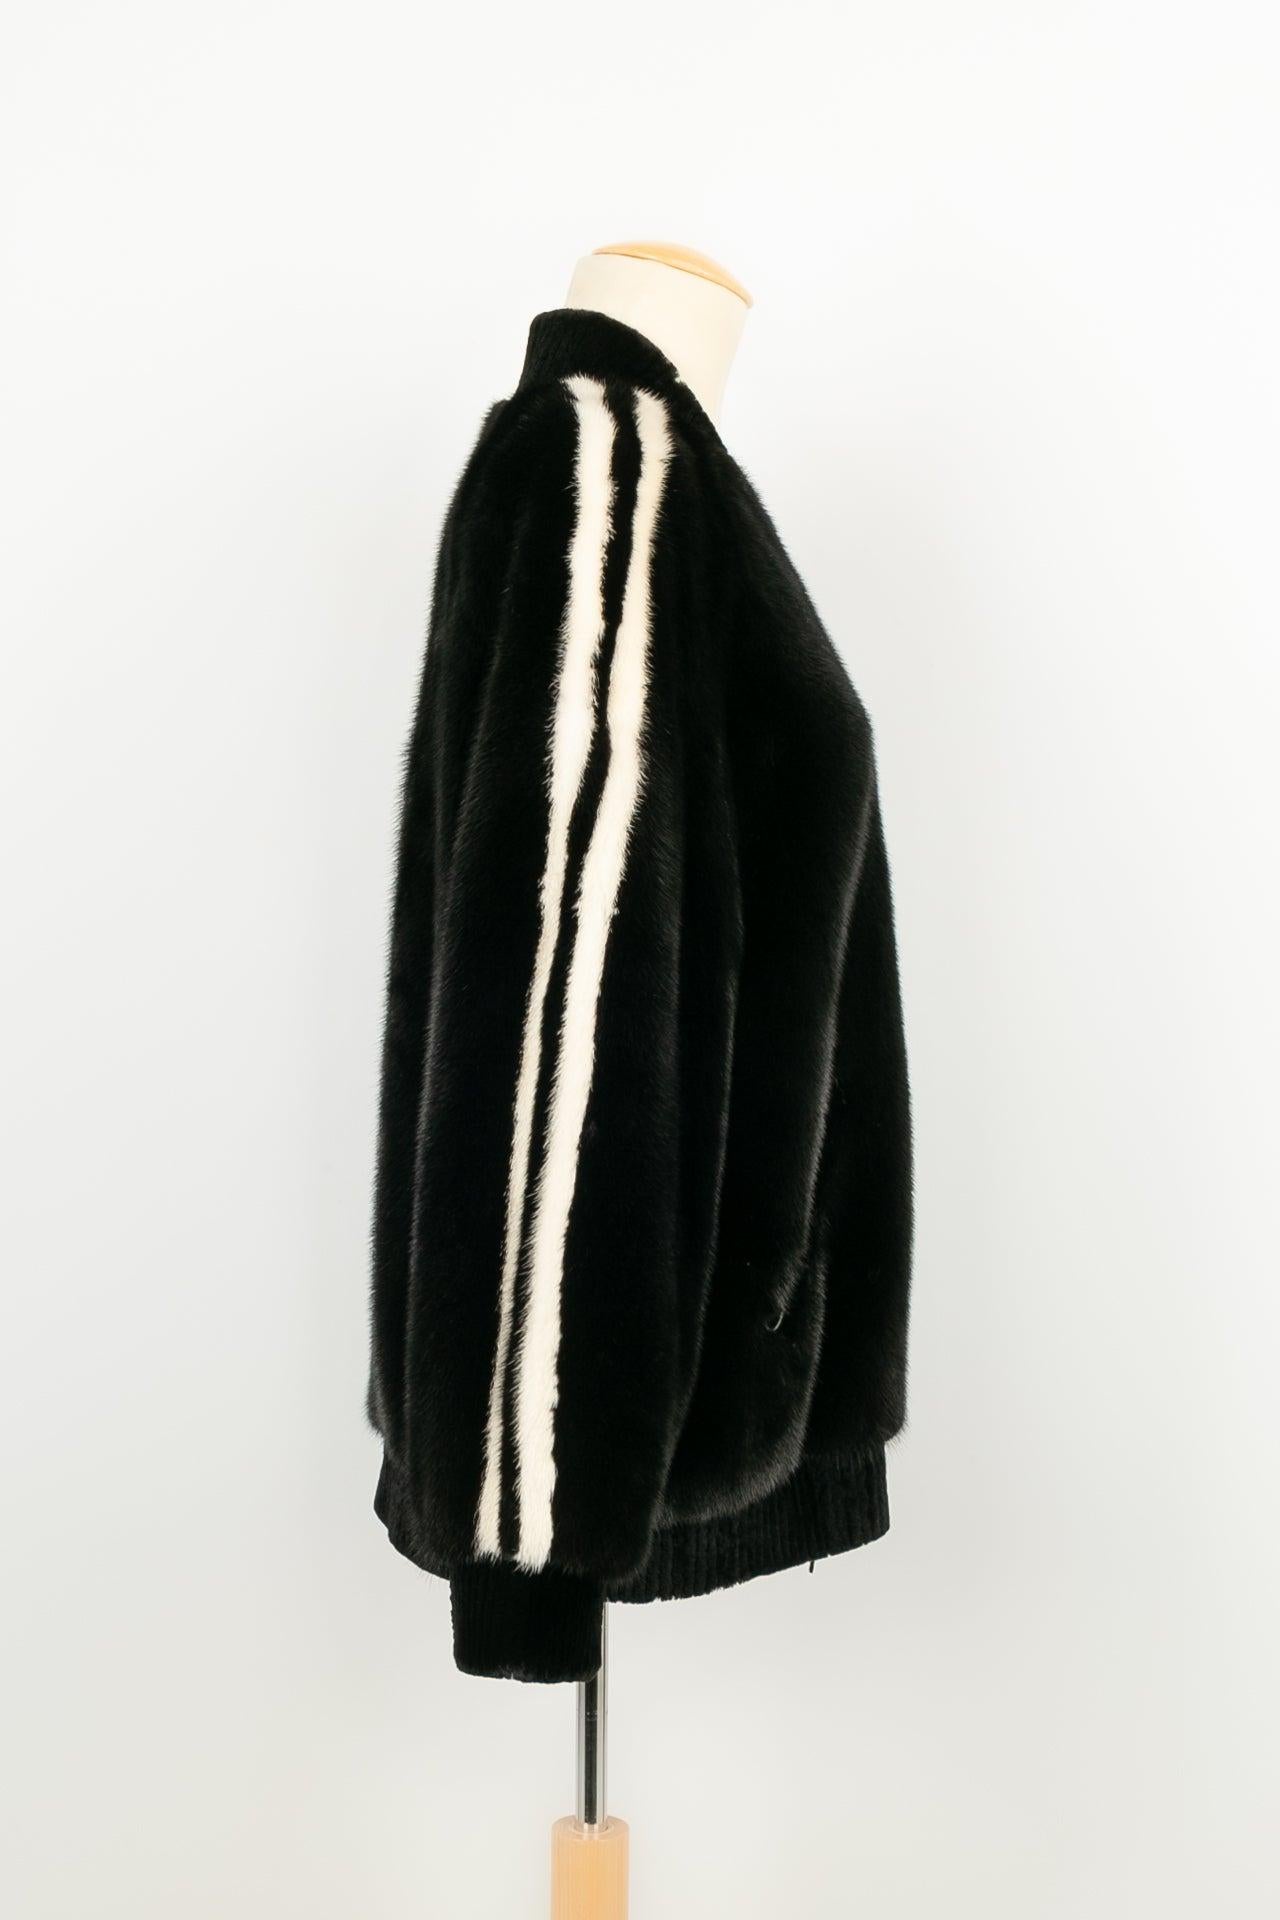 Women's or Men's Wonderful Jacket in Black and White Mink For Sale